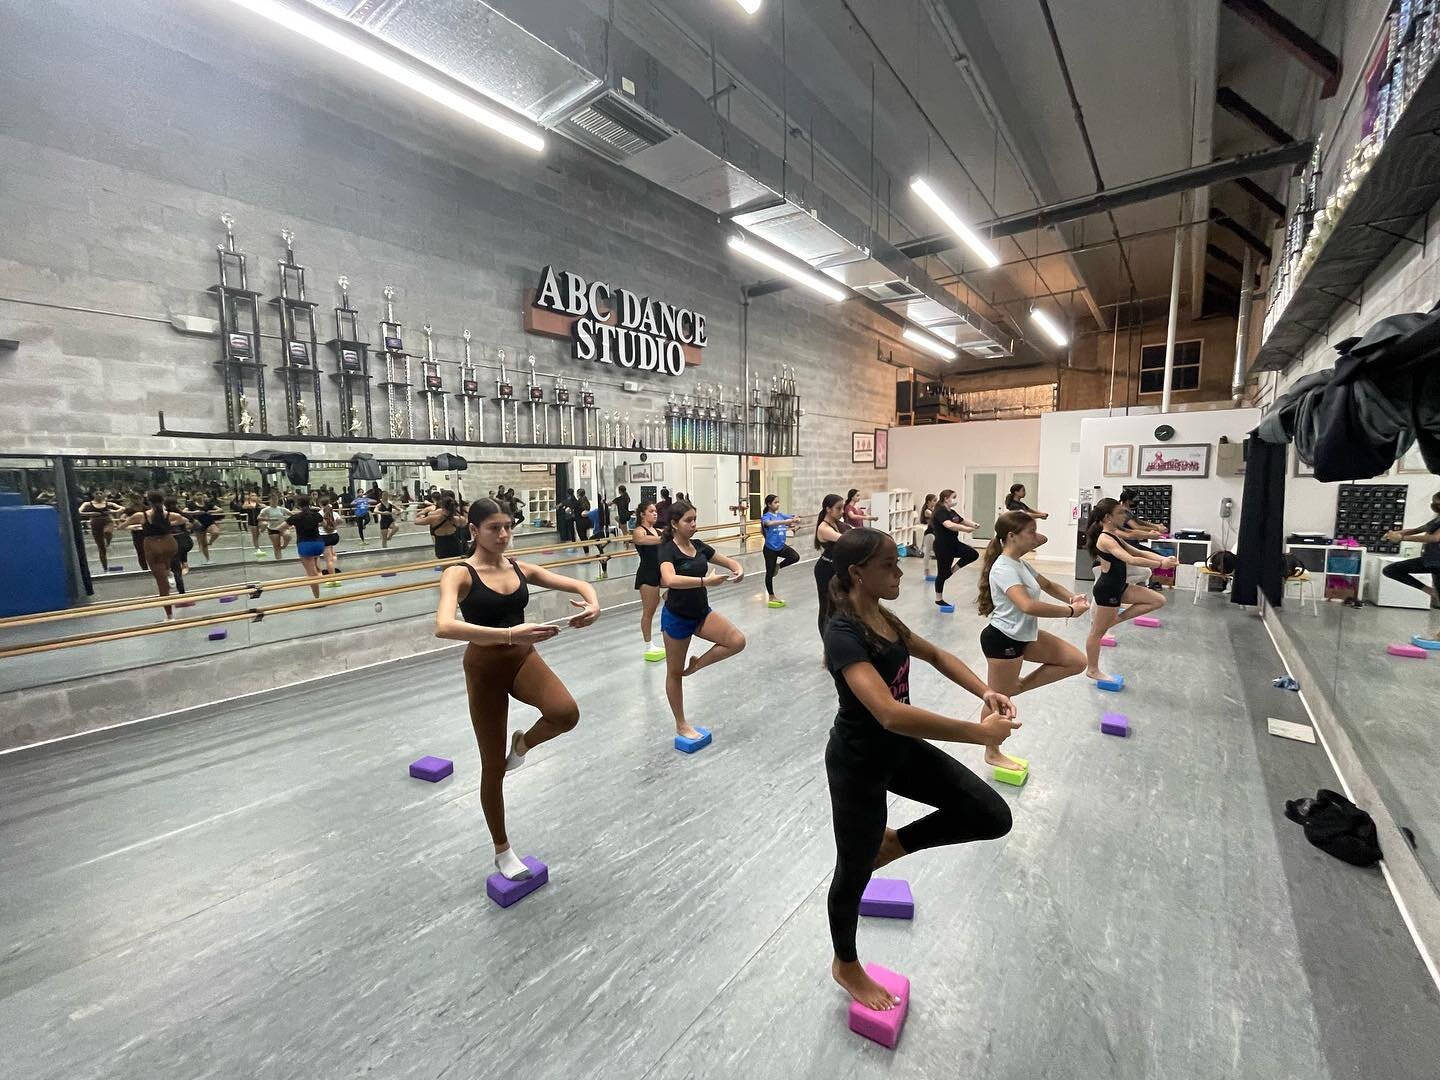 Dancers working hard in Turns and Jumps class! .
.
.
.
#dancer #dance #dancersofinstagram #dancephotography #dancers #danceclass #dancecompetition #nodaysoff #abcdancemiami #abcdancecompany #abcdancestudio #lyrical #contemporarydance #contemporary #t